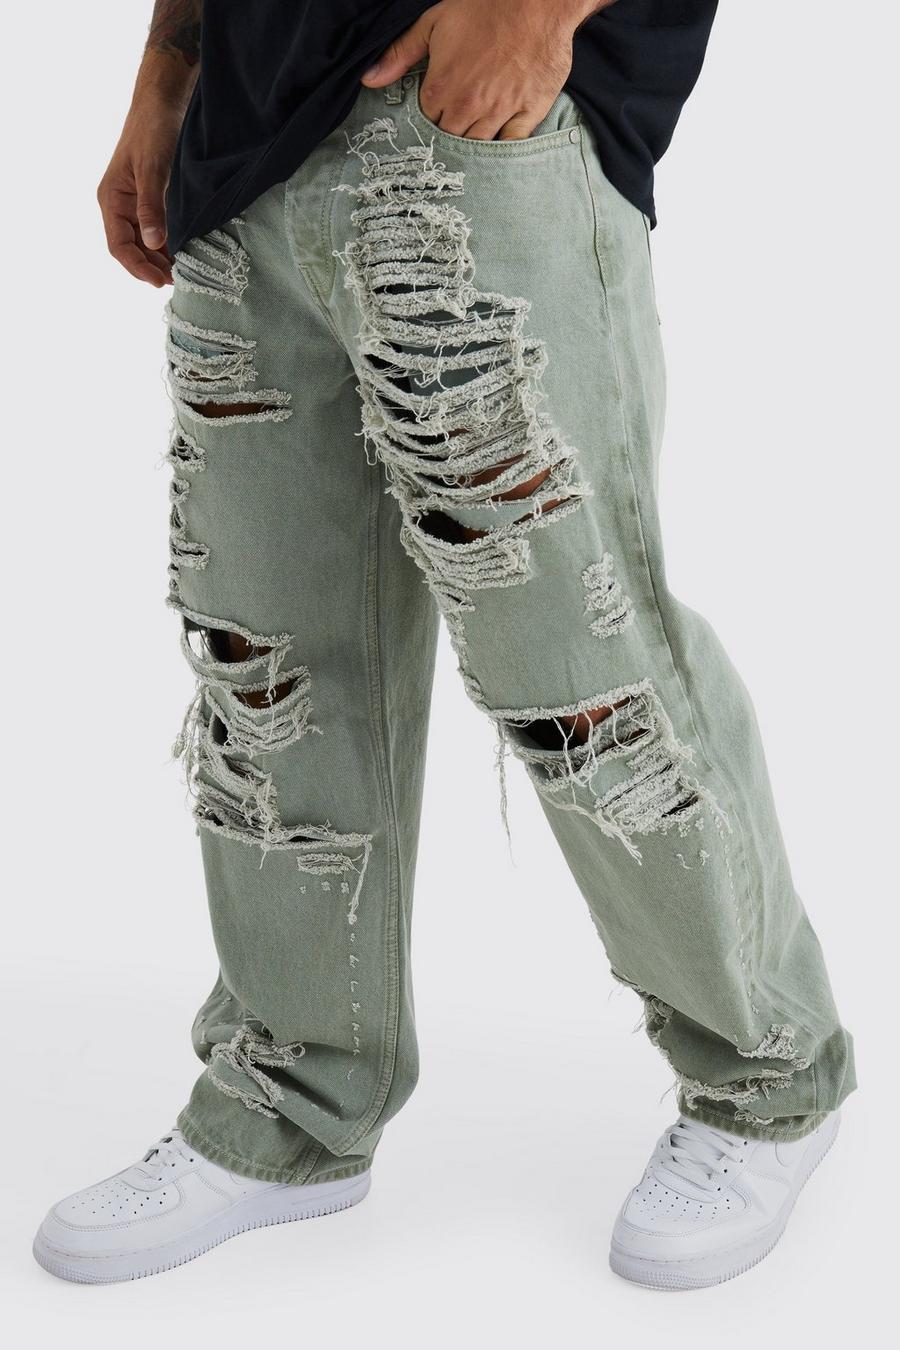 Jeans Men Street Ripped, Mens Ripped Jeans Pants, Y2k Clothes Men Jeans